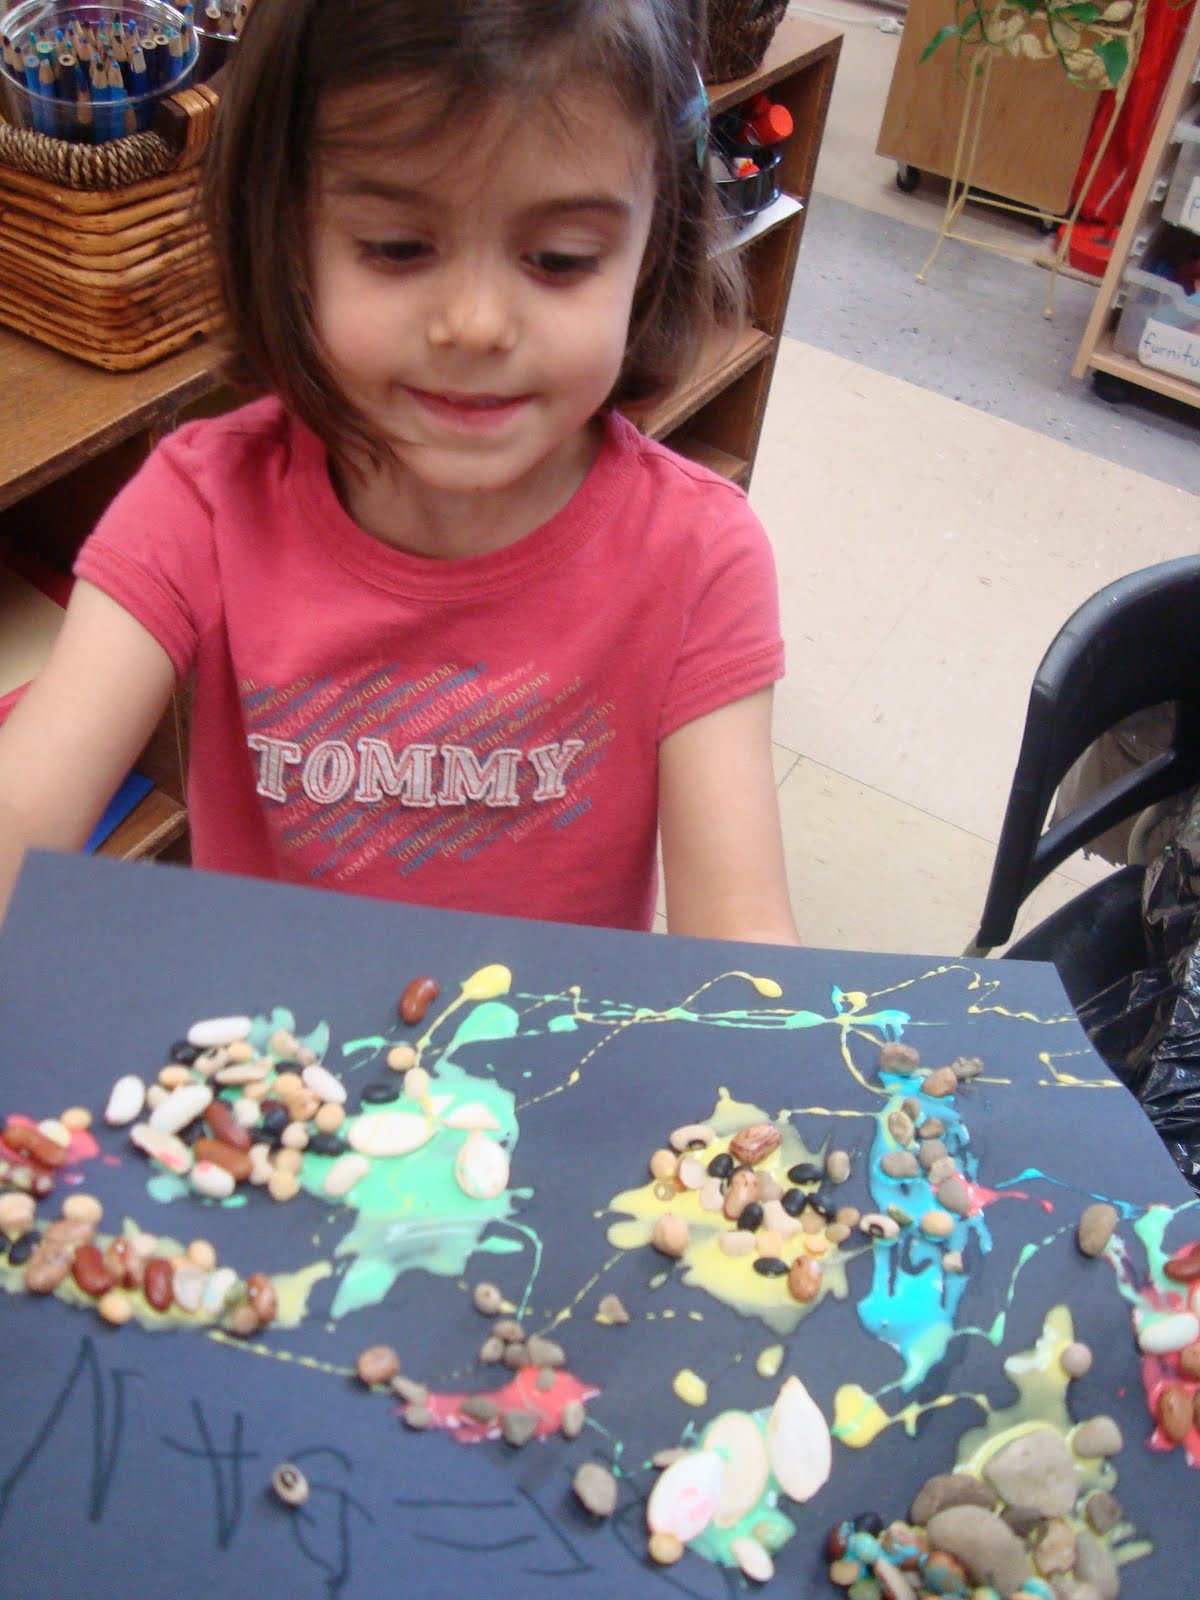 Joyful Learning in the Early Years: Coloured Glue Collages